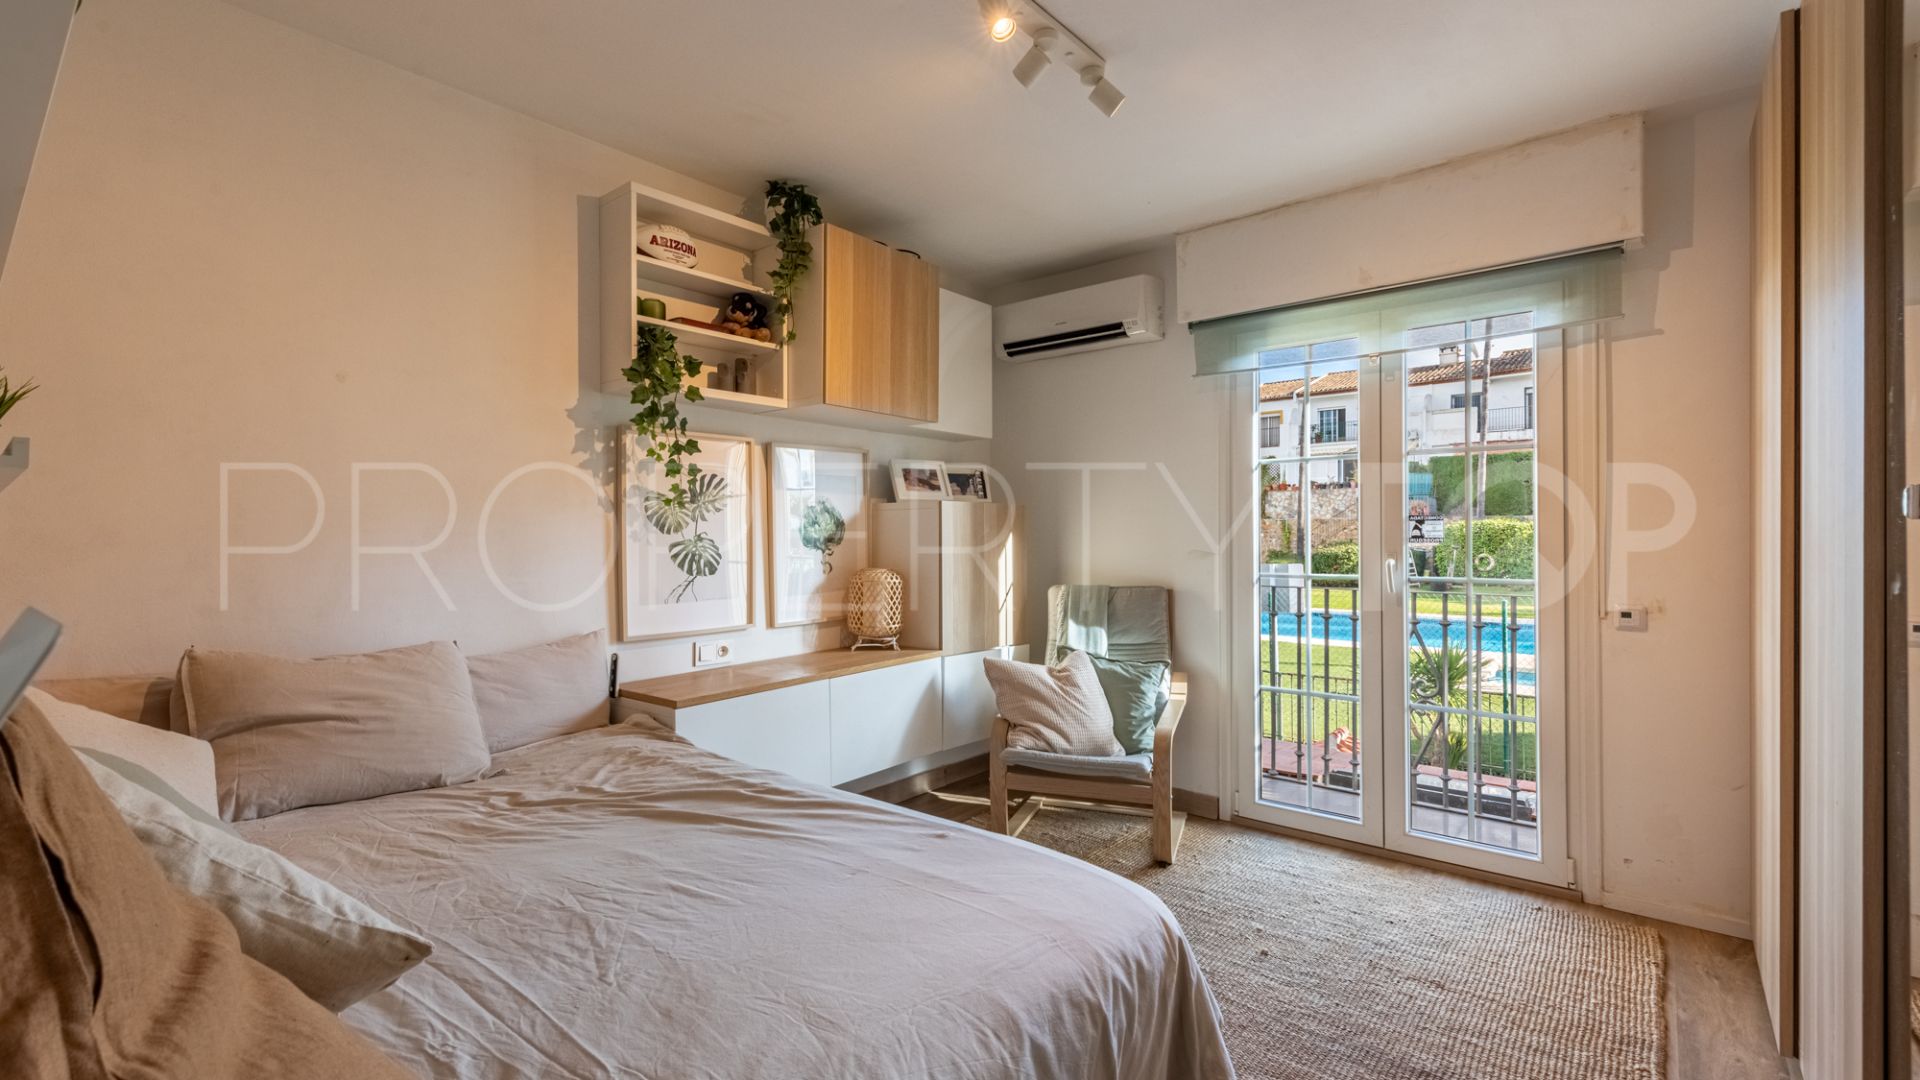 For sale town house in Atalaya Park with 3 bedrooms